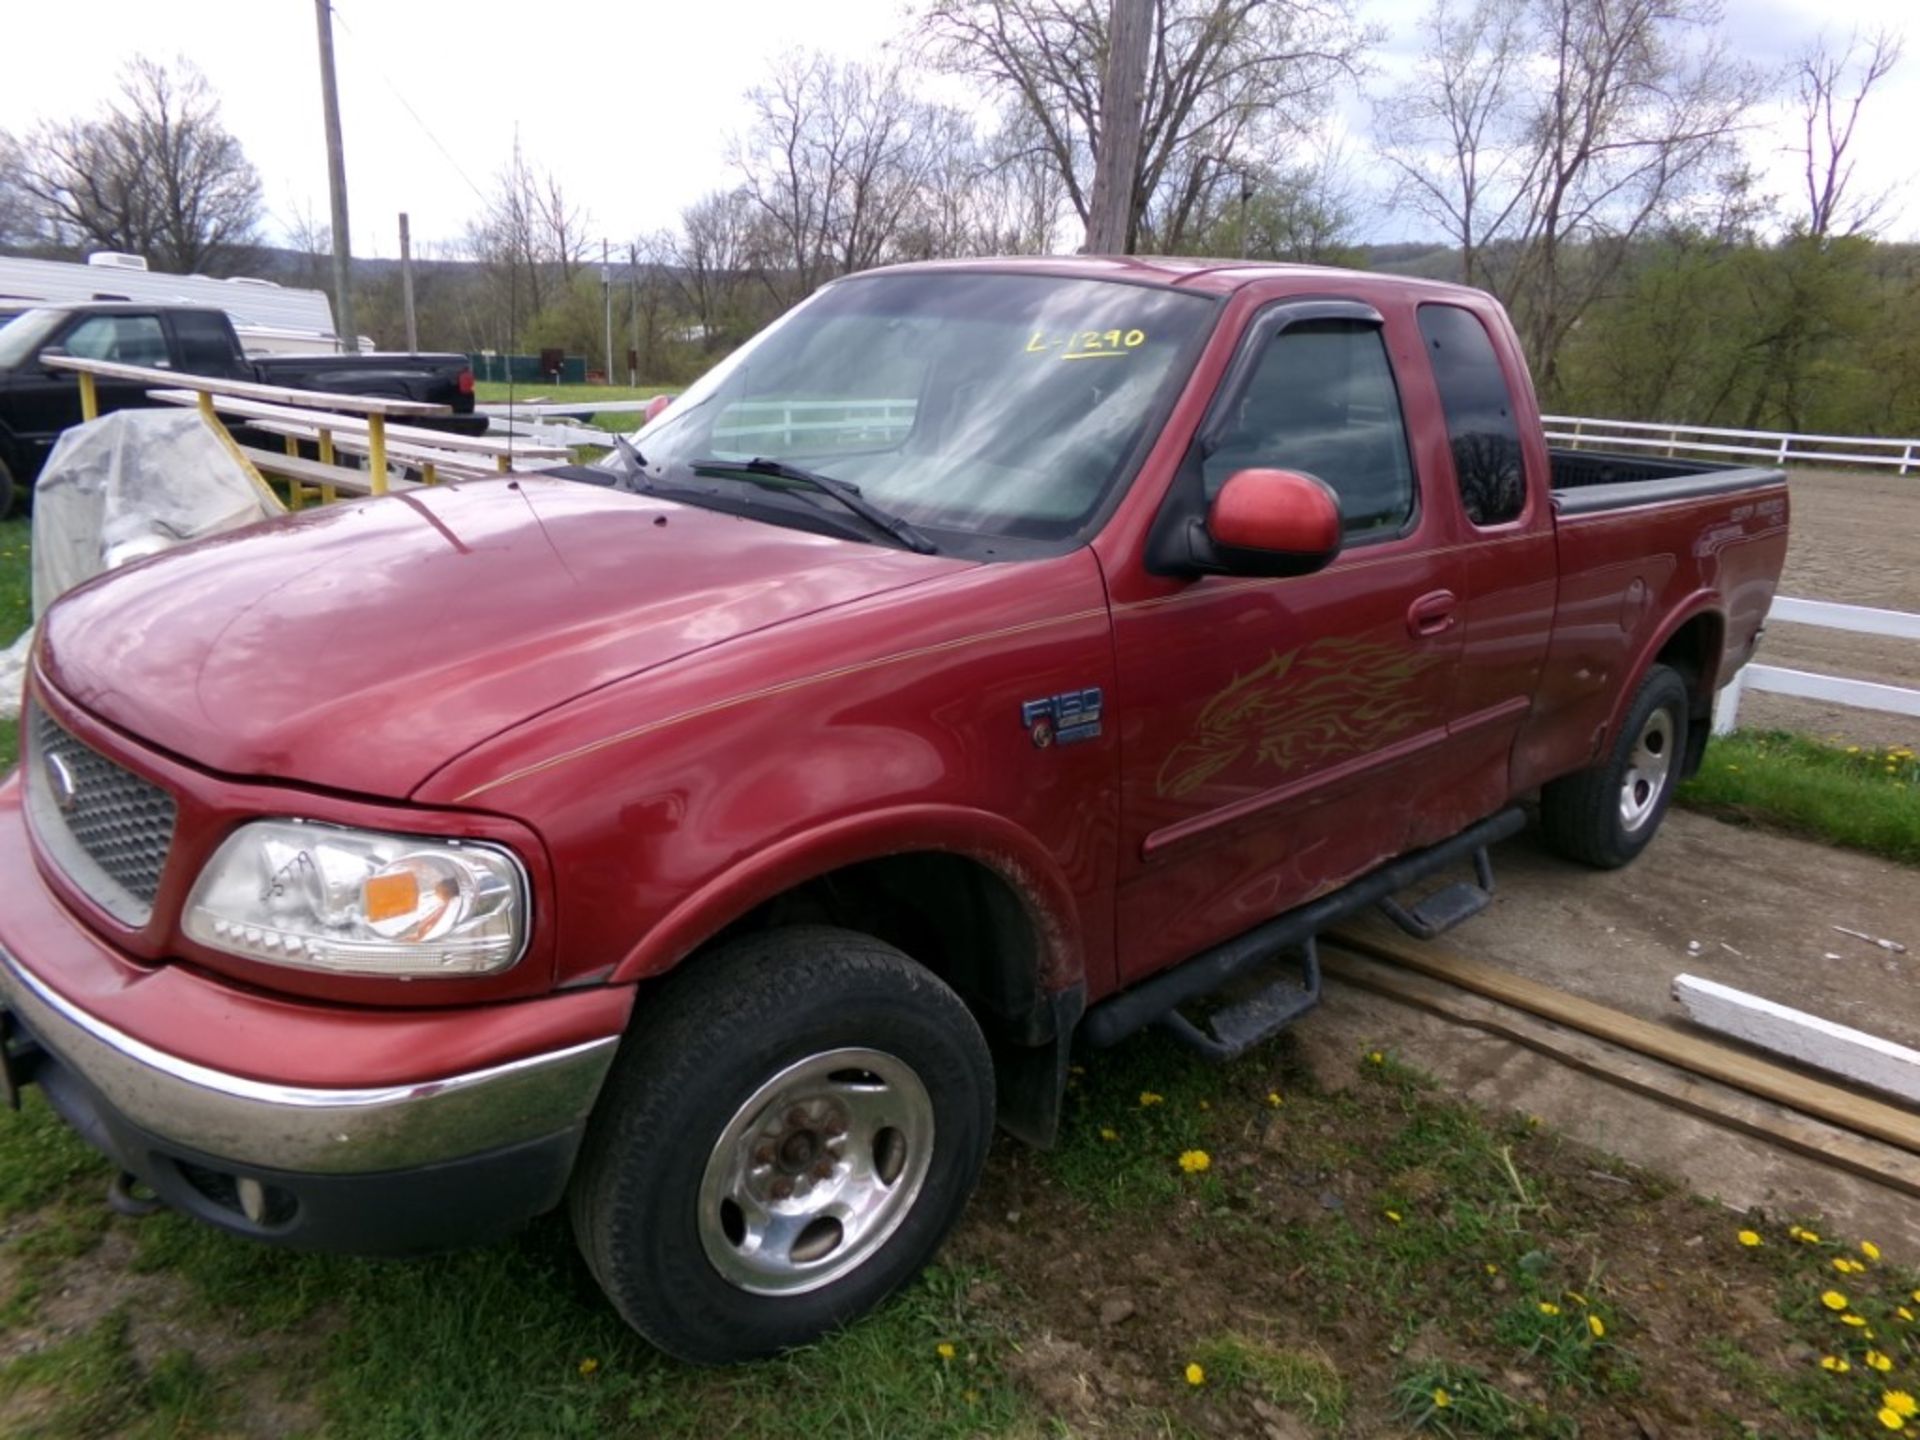 2001 Ford F150 4 x 4 Ext. Cab , Maroon, Auto, 4.6 New Crate Engine, 299,197 Miles, NEEDS COIL PACKS,